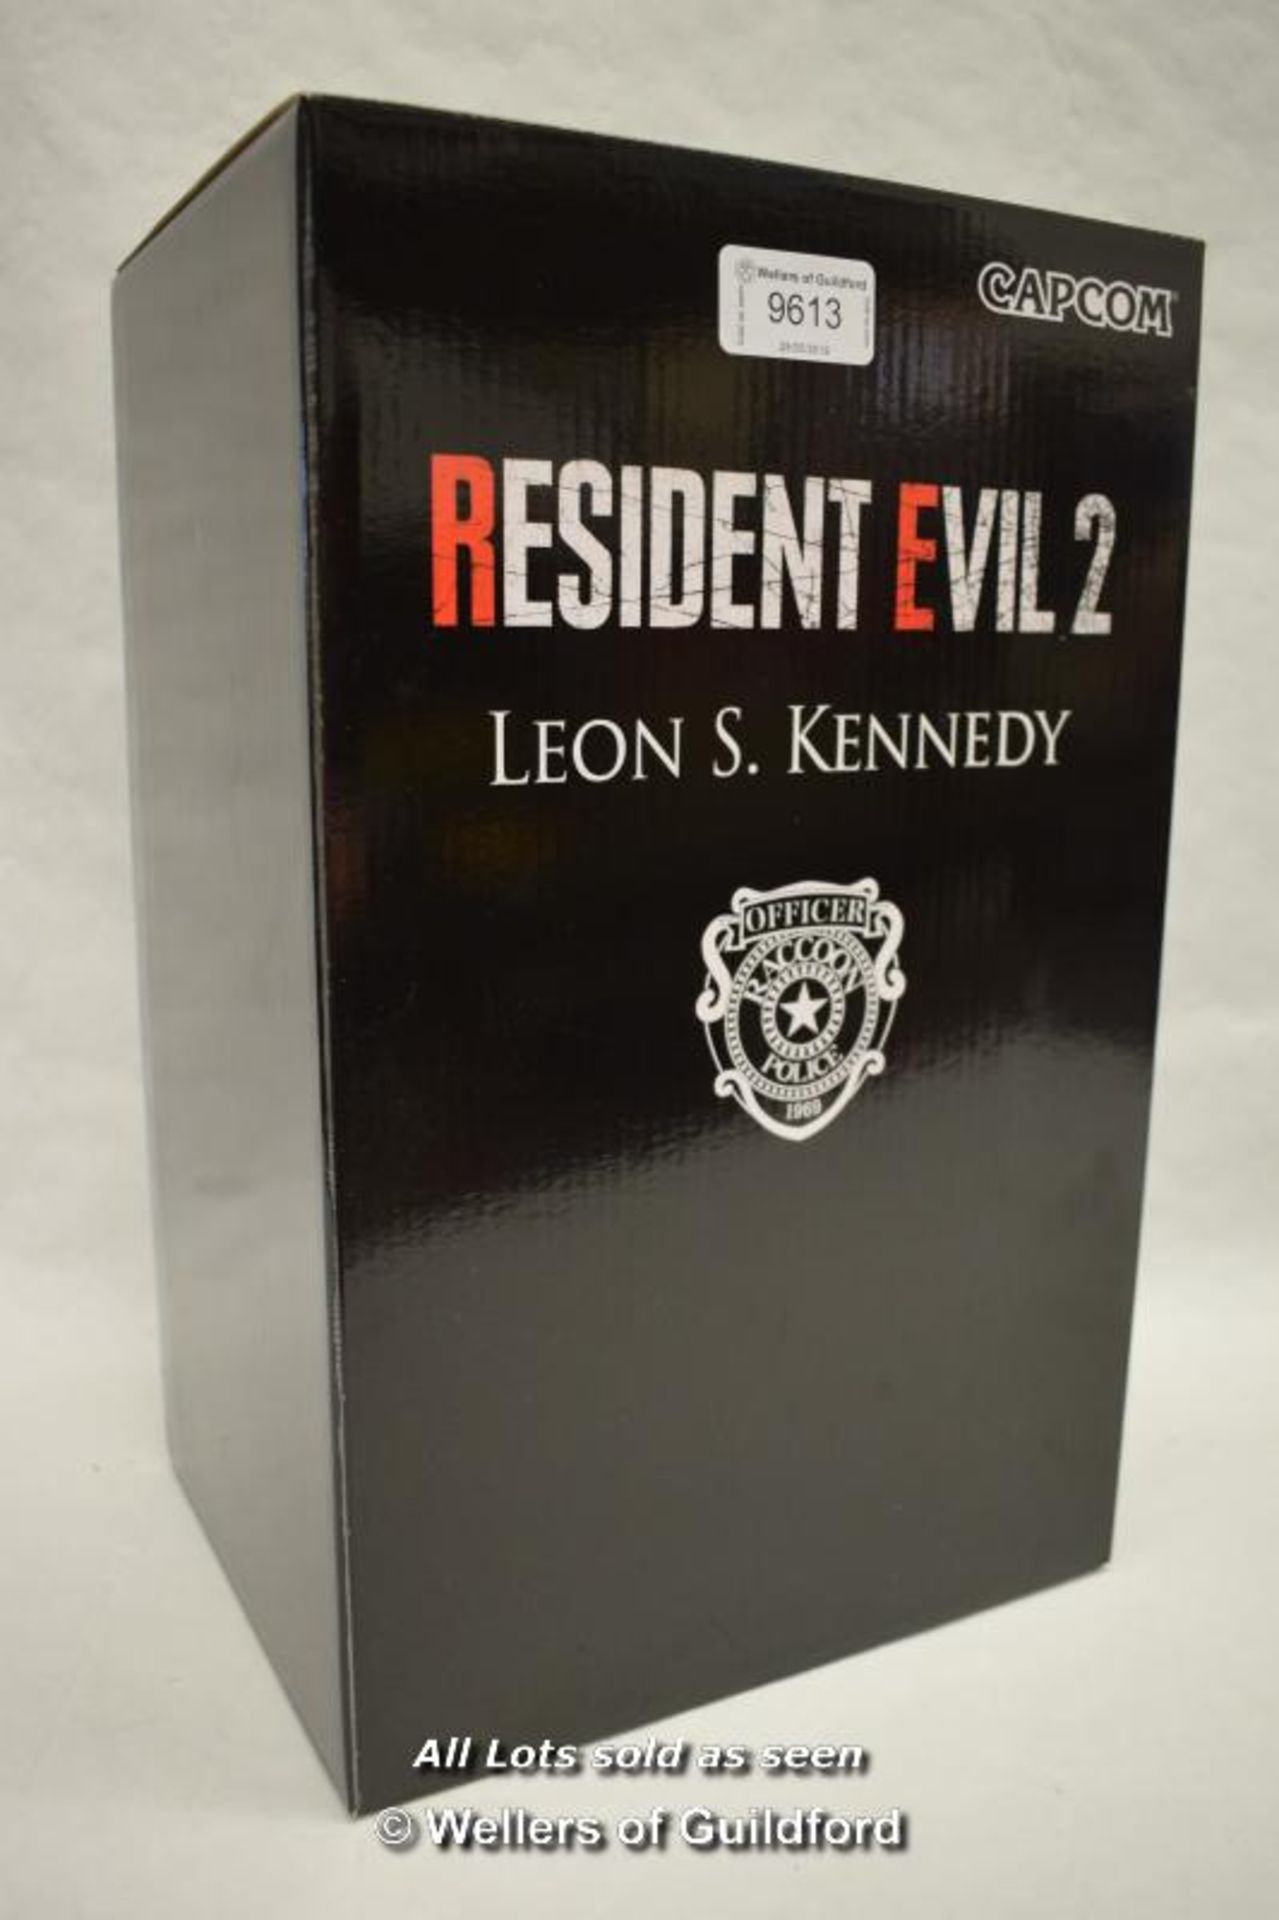 *LEON S. KENNEDY 12" FIGURE FROM RESIDENT EVIL 2 (ORIGINALLY PART OF THE XBOX ONE COLLECTORS EDITION